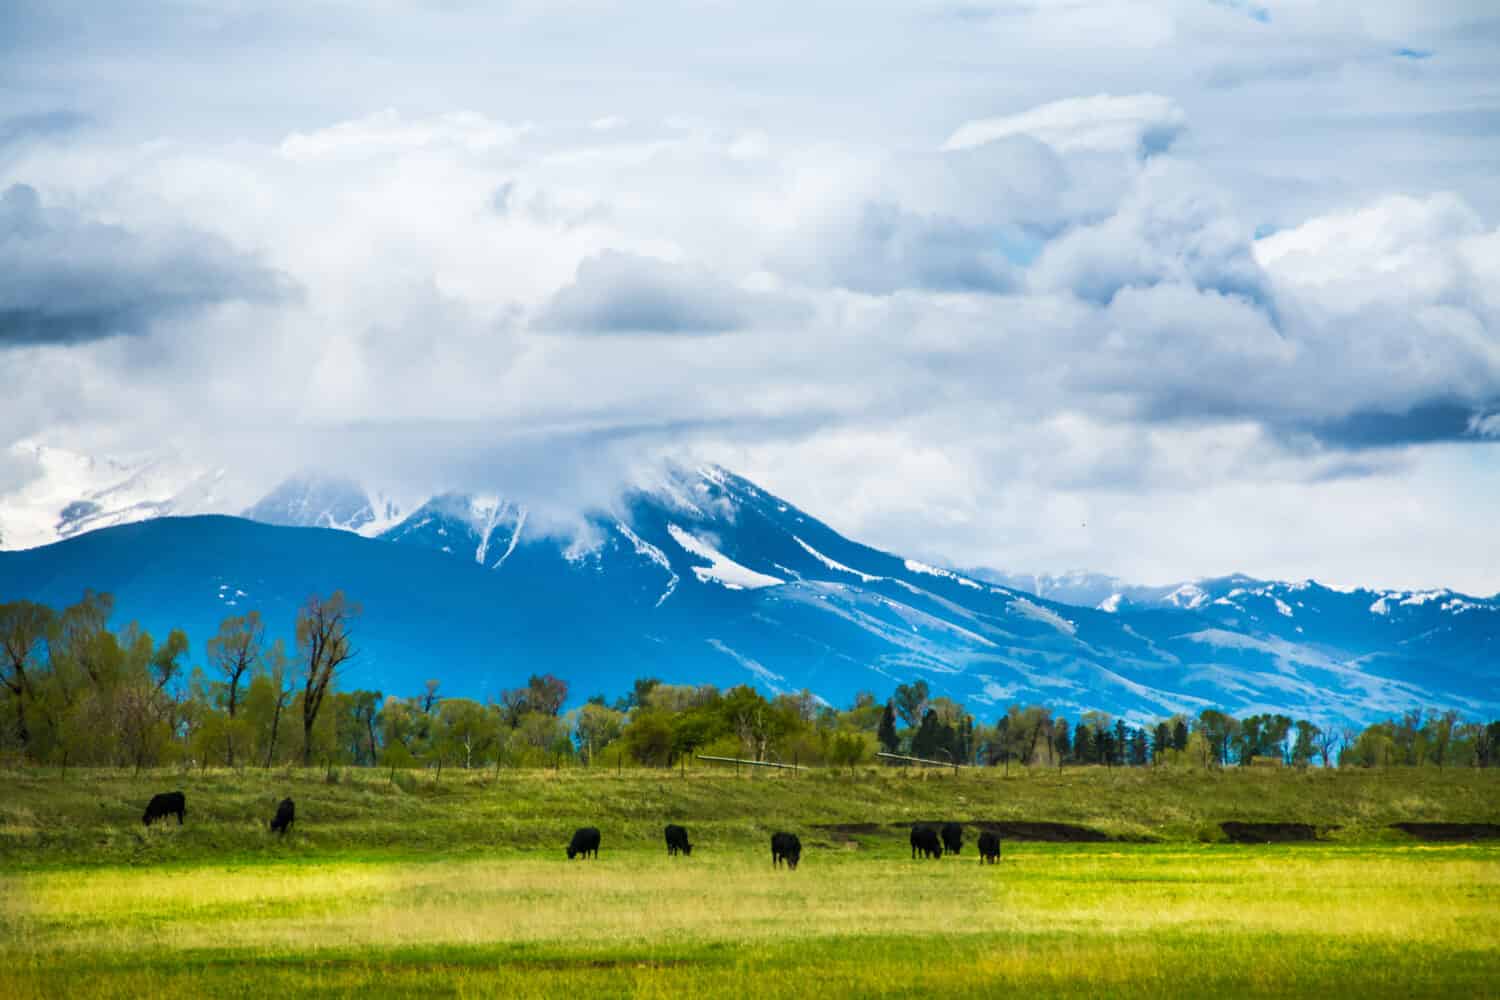 Low Hanging Clouds over Paradise Valley, in between Bozeman Montana and Livingston Montana. Cattle are grazing. Beautiful deep blue mountains and green pasture.